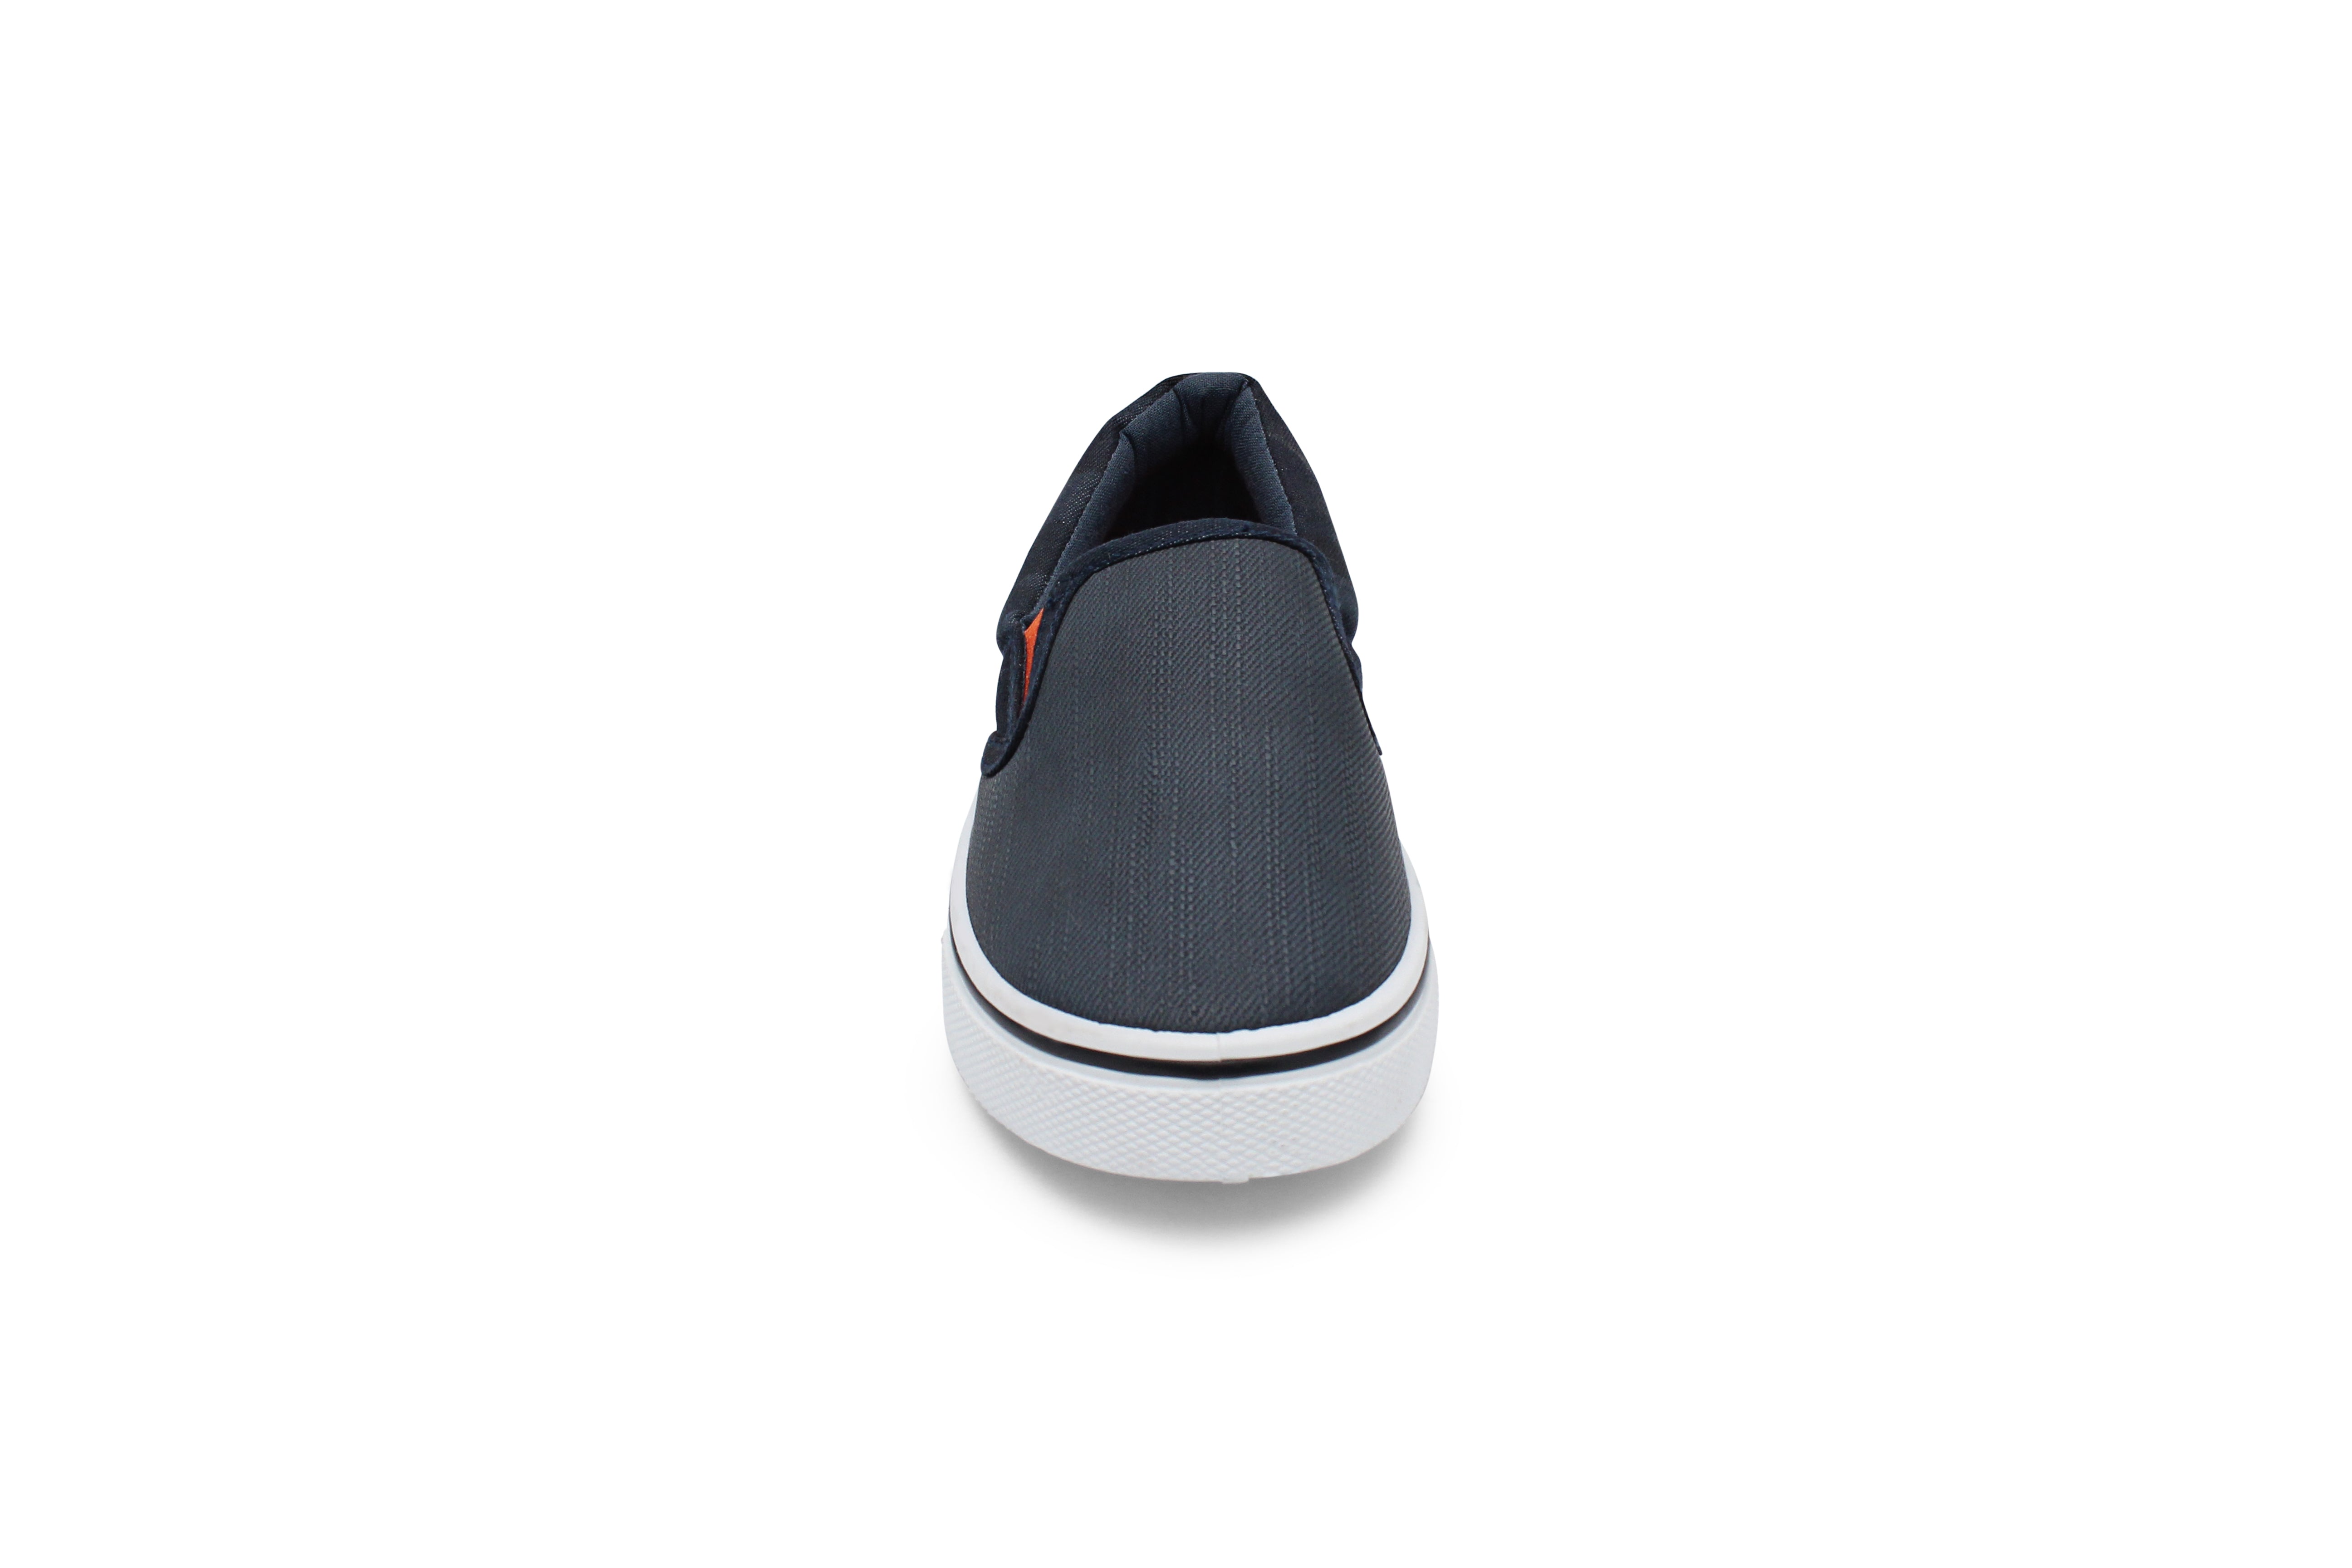 Classic Canvas Shoes For Boys